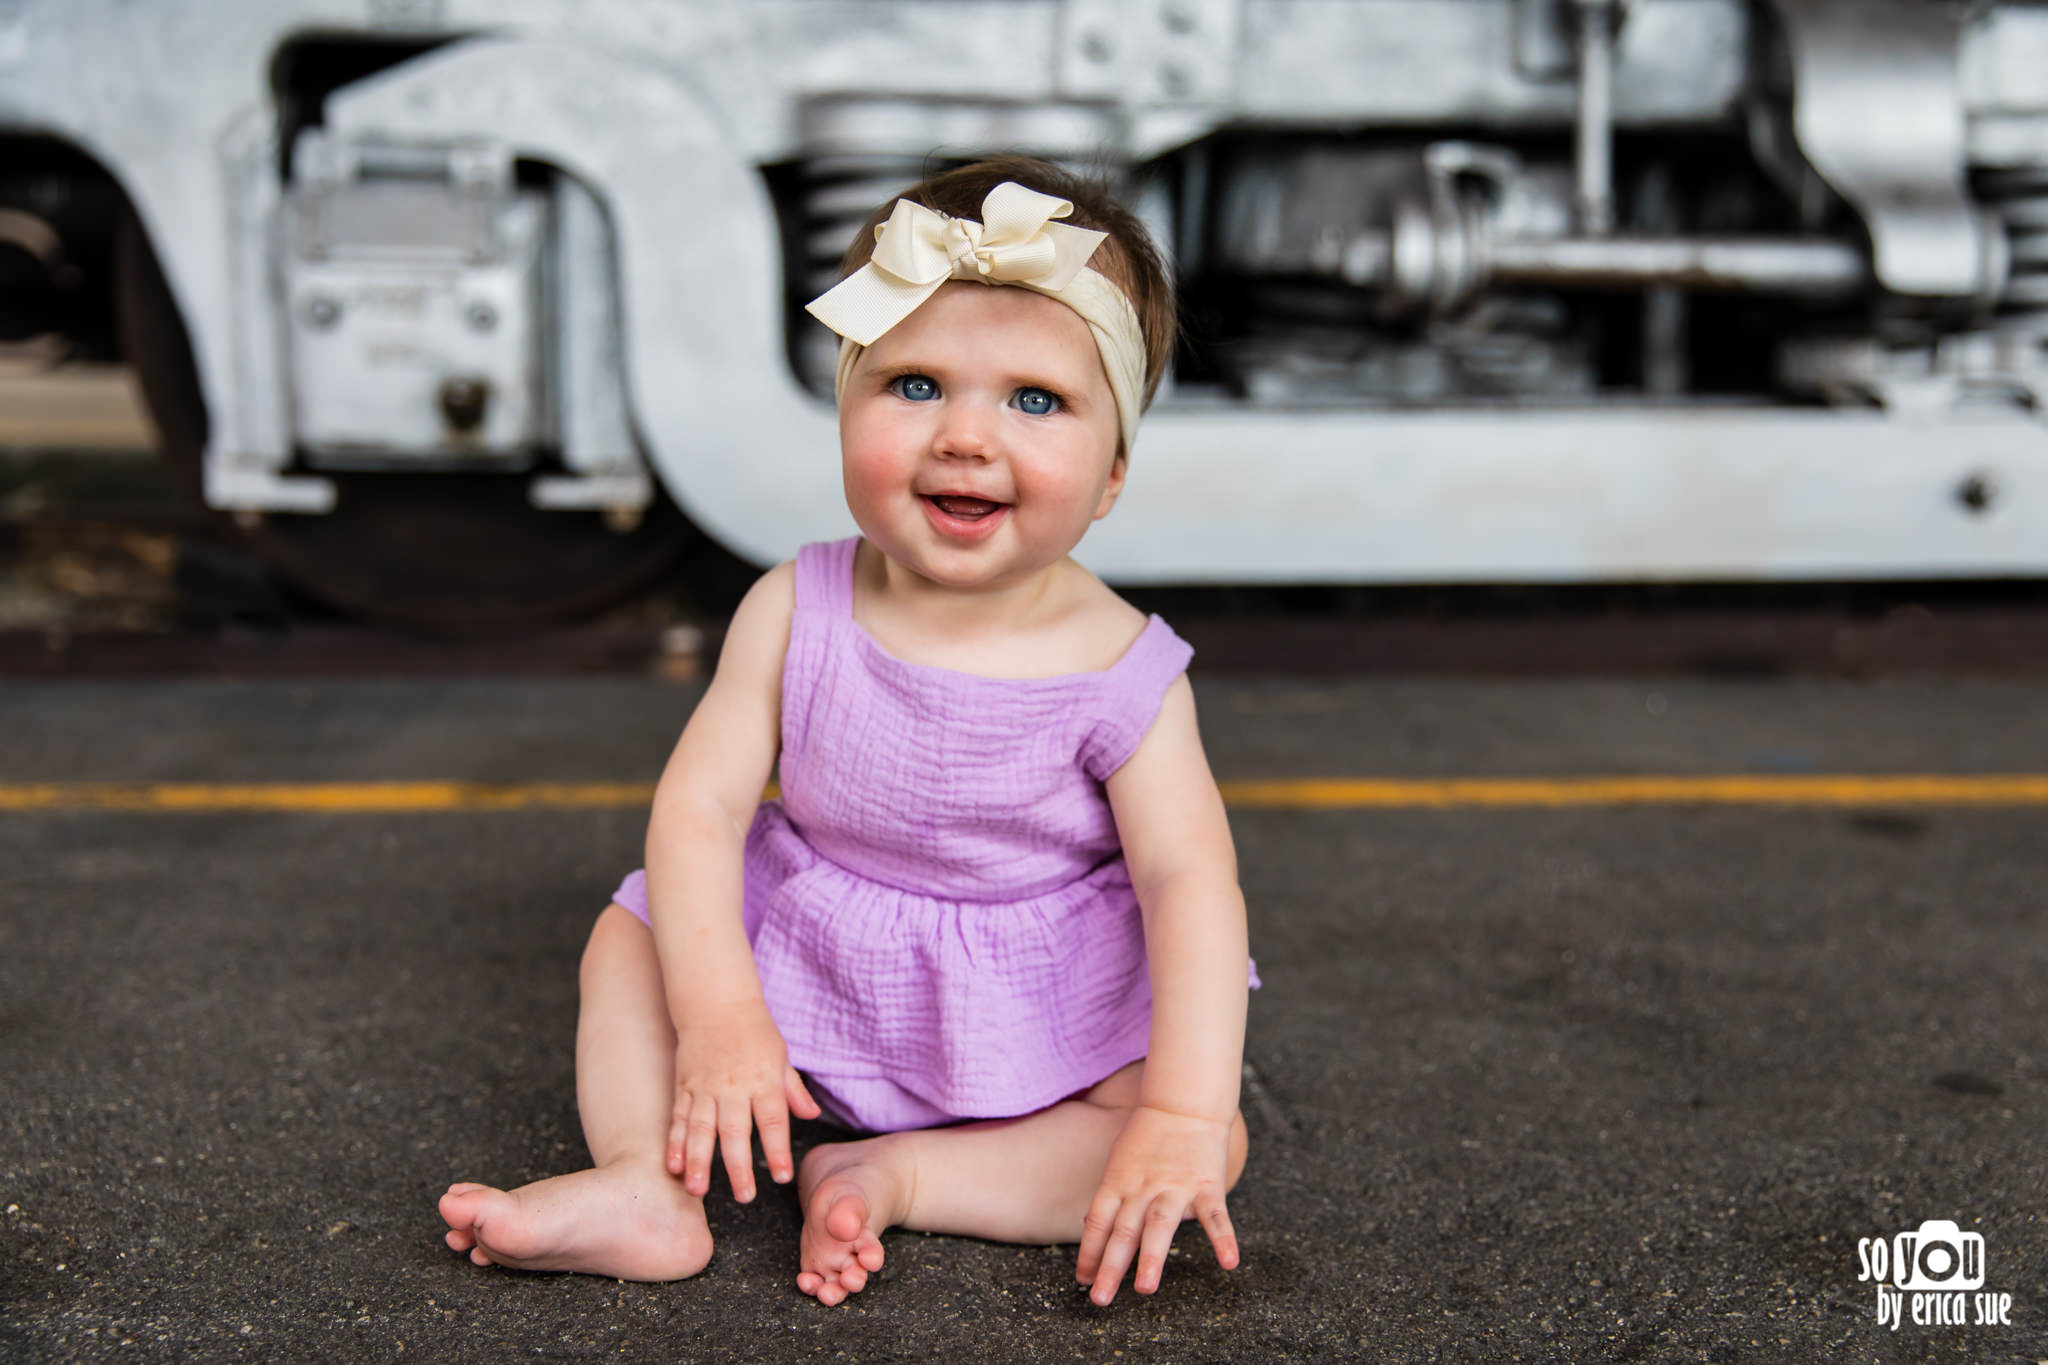 so-you-by-erica-sue-gold-coast-railroad-museum-miami-family-photo-shoot-session-7620.JPG